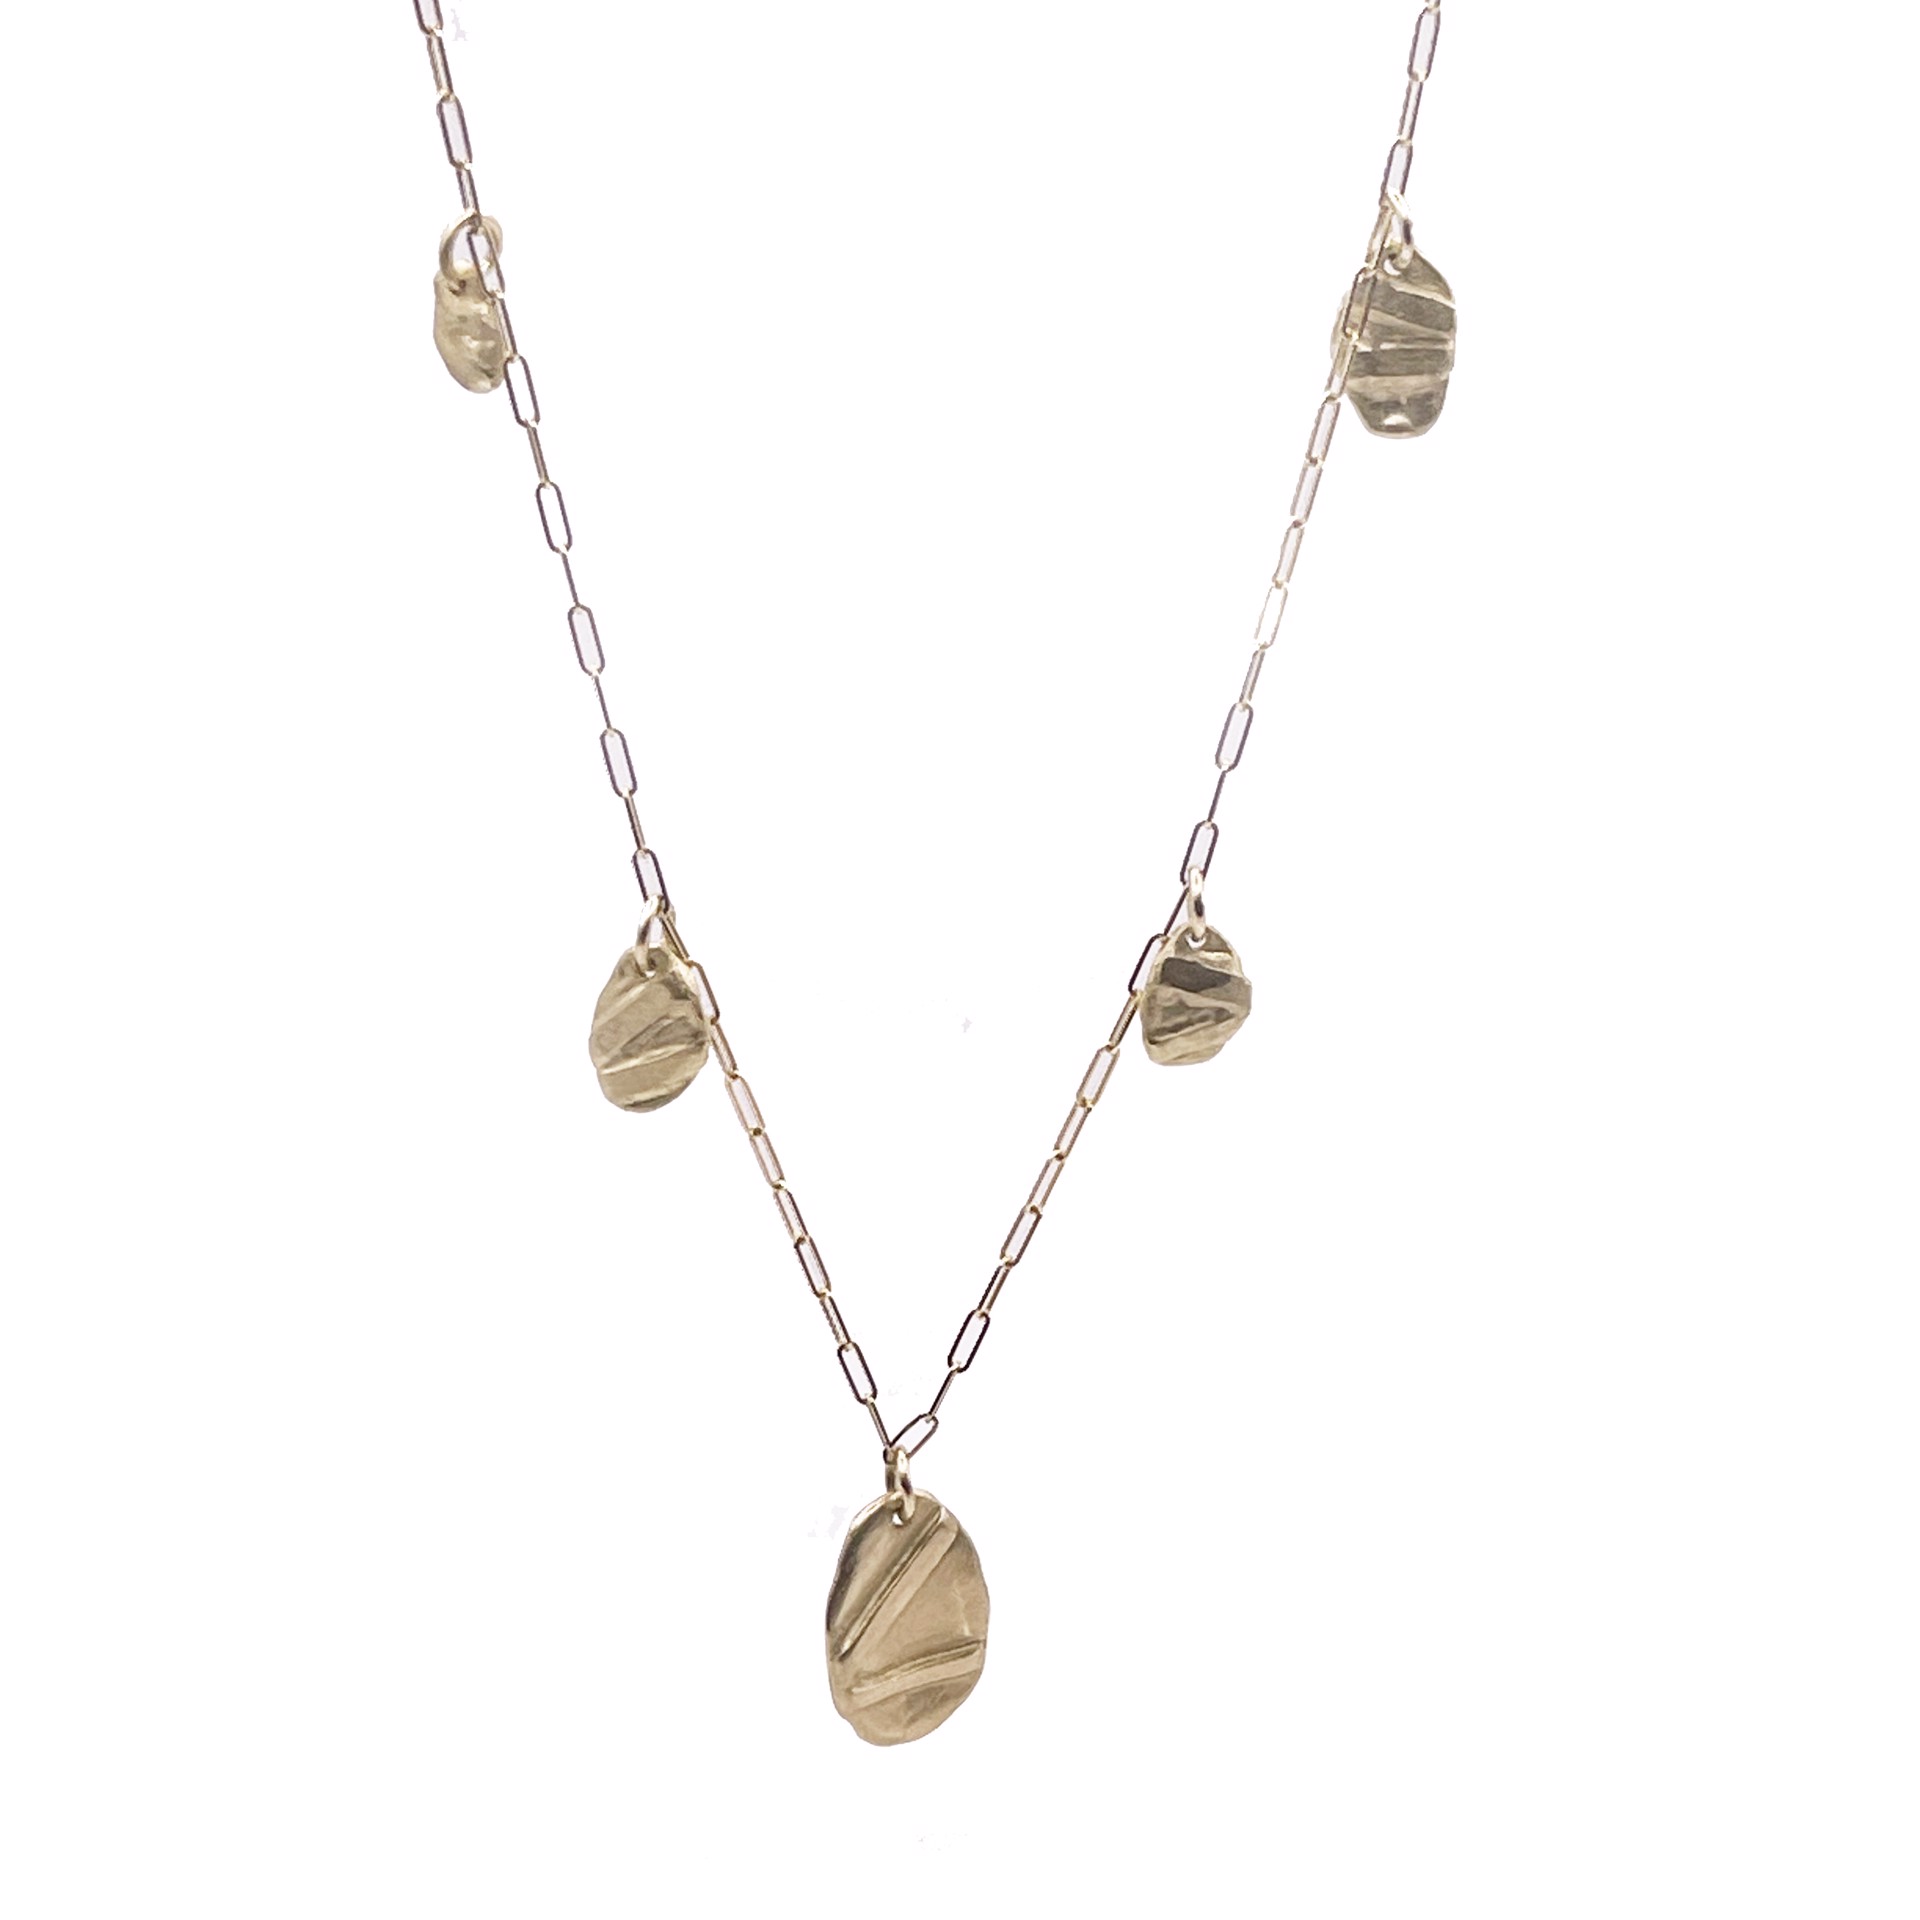 LLN4- Lifeline 5 Pendant Station Necklace on Link Chain (18k Gold) by Leandra Hill